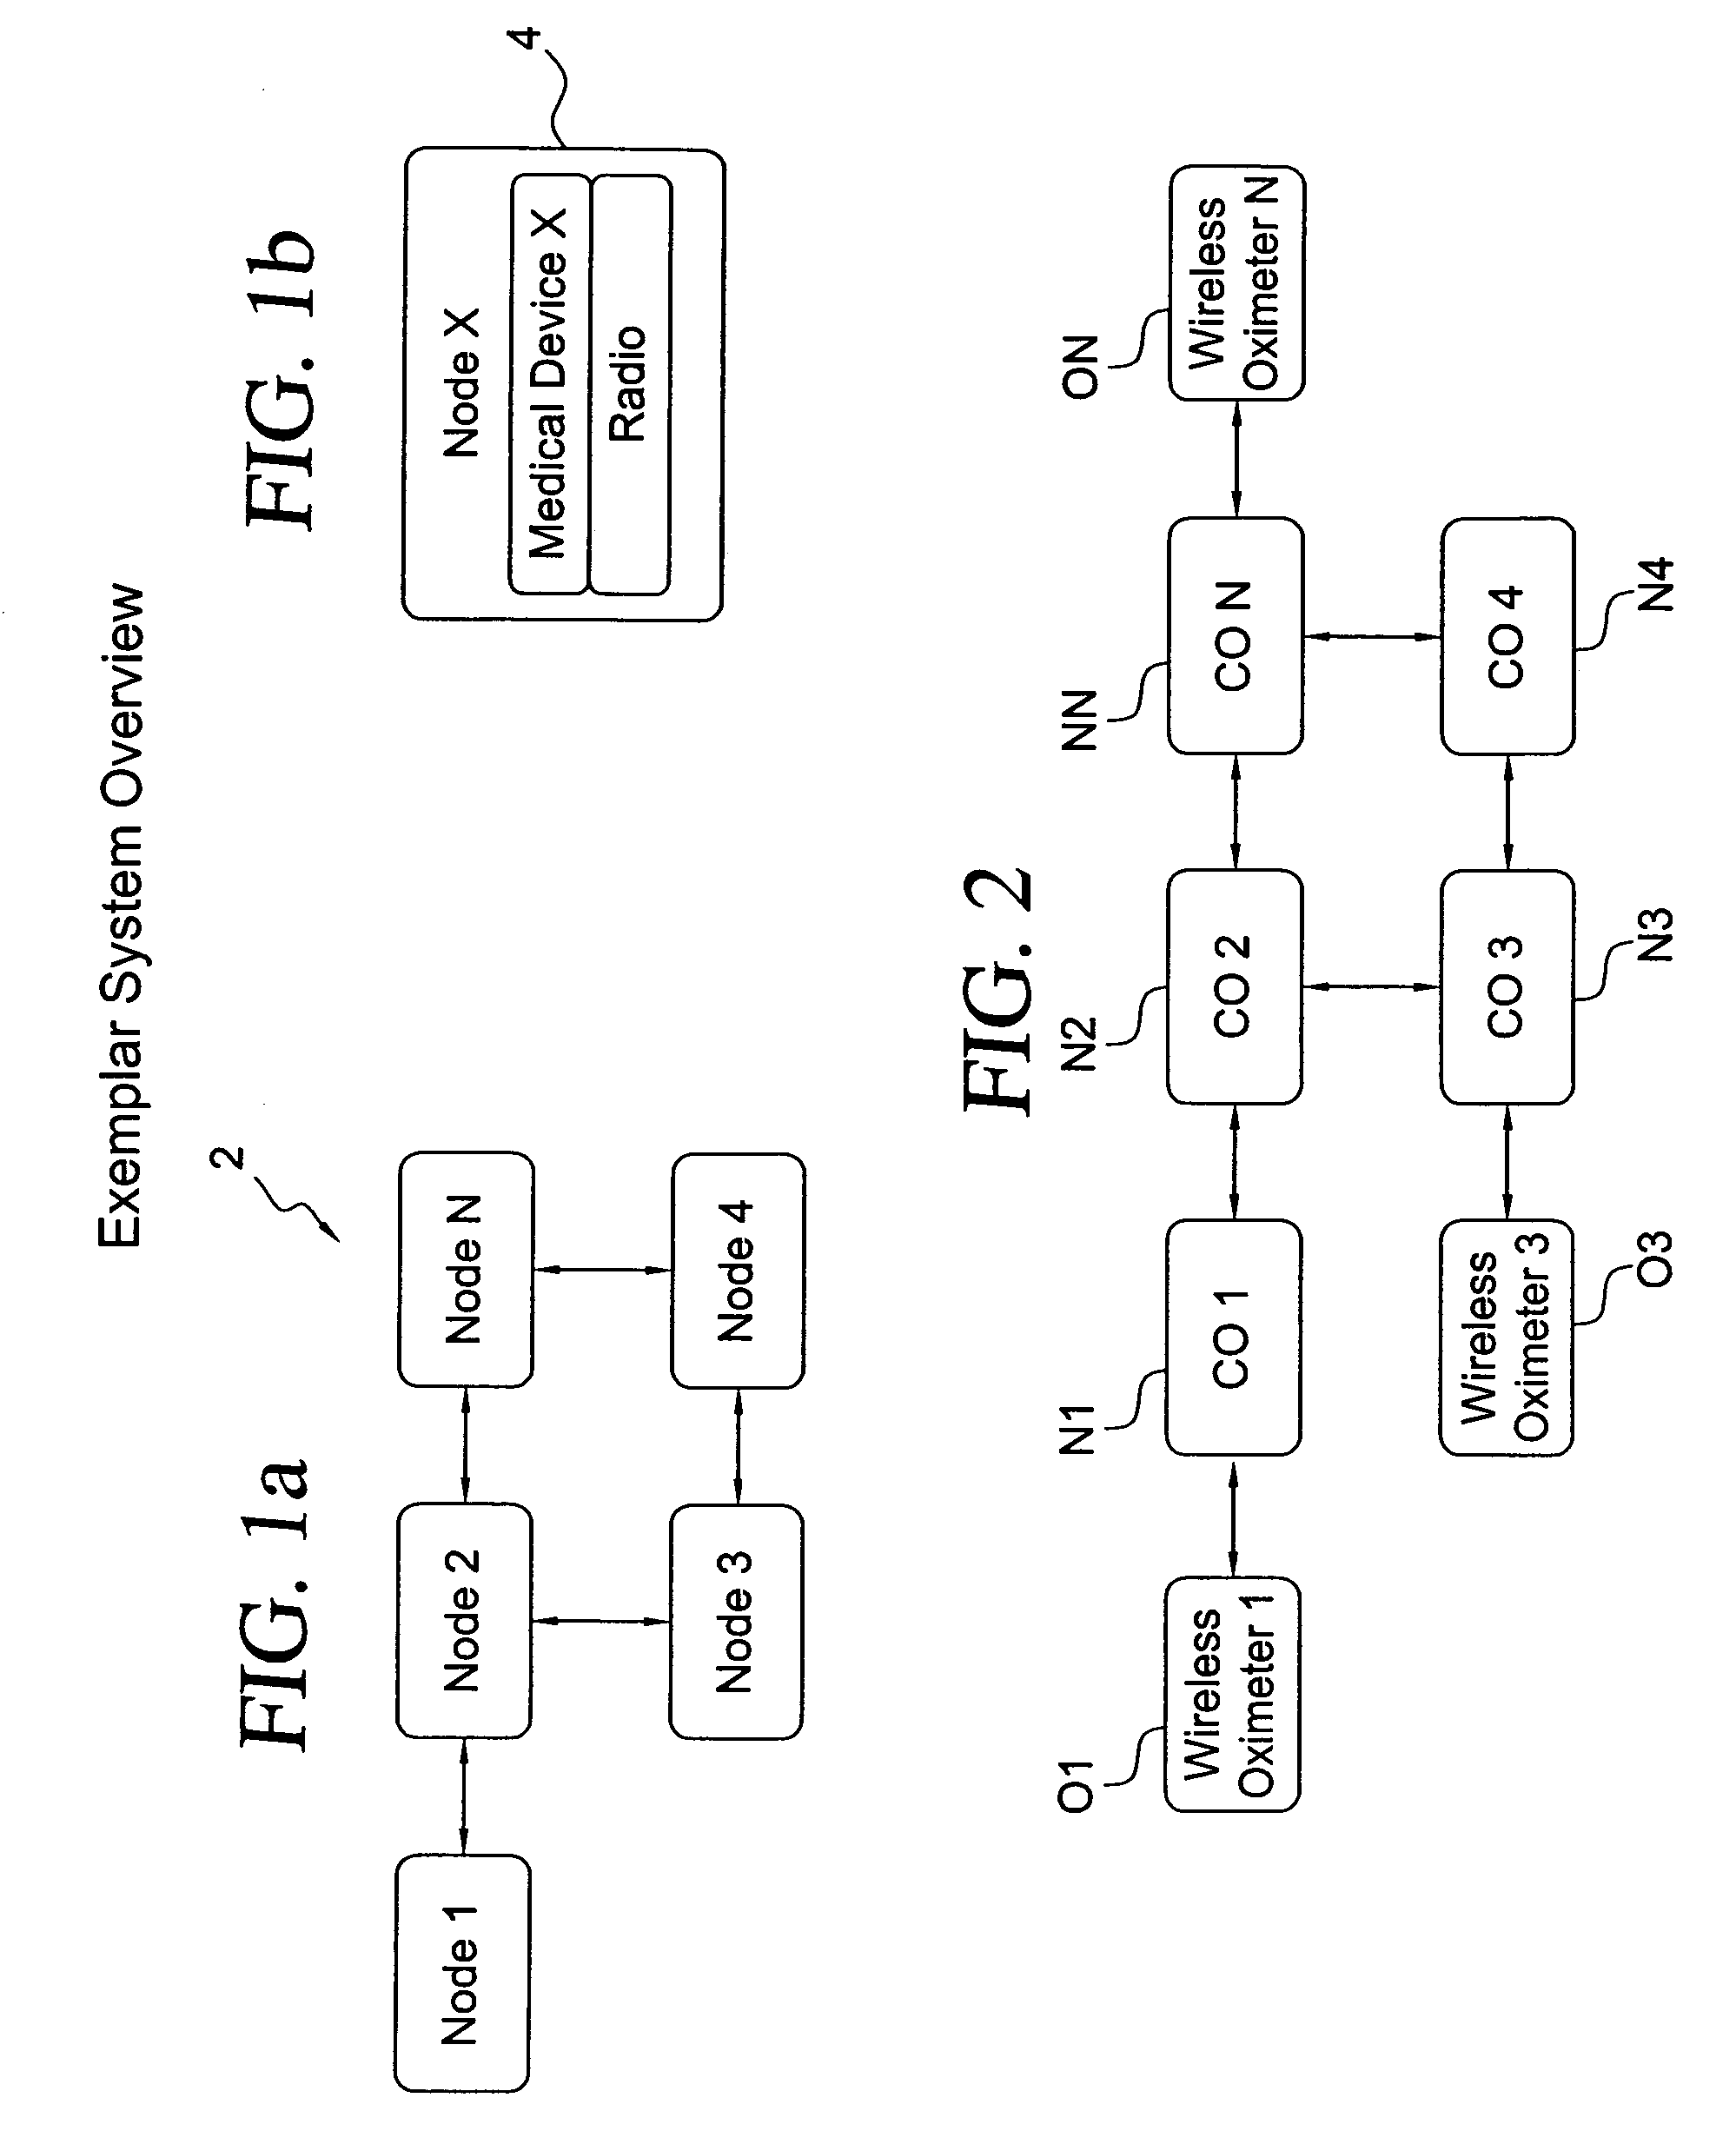 Method for establishing a telecommunications network for patient monitoring